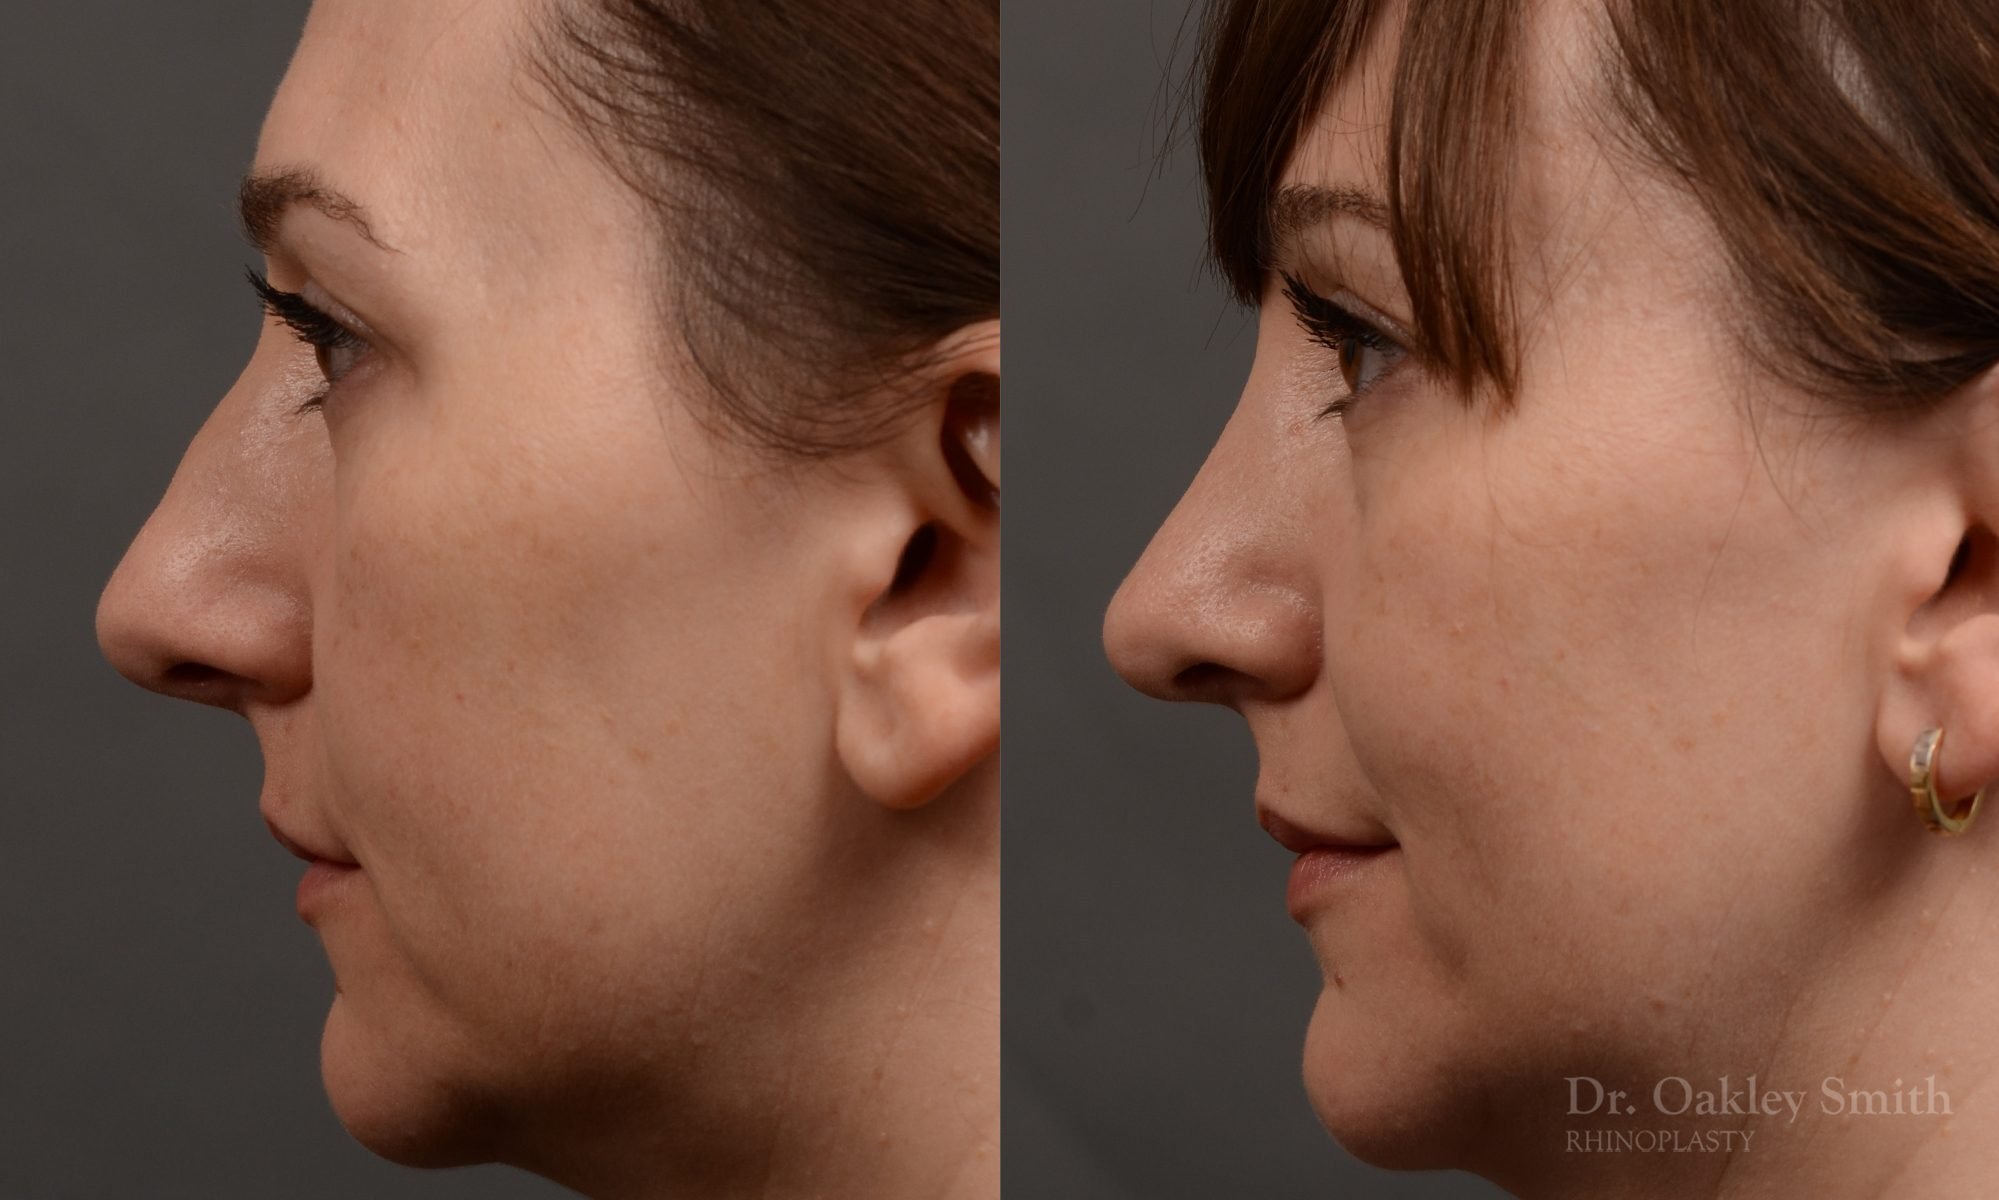 Rhinoplasty - 397 – Rhinoplasty Before and After Case 397